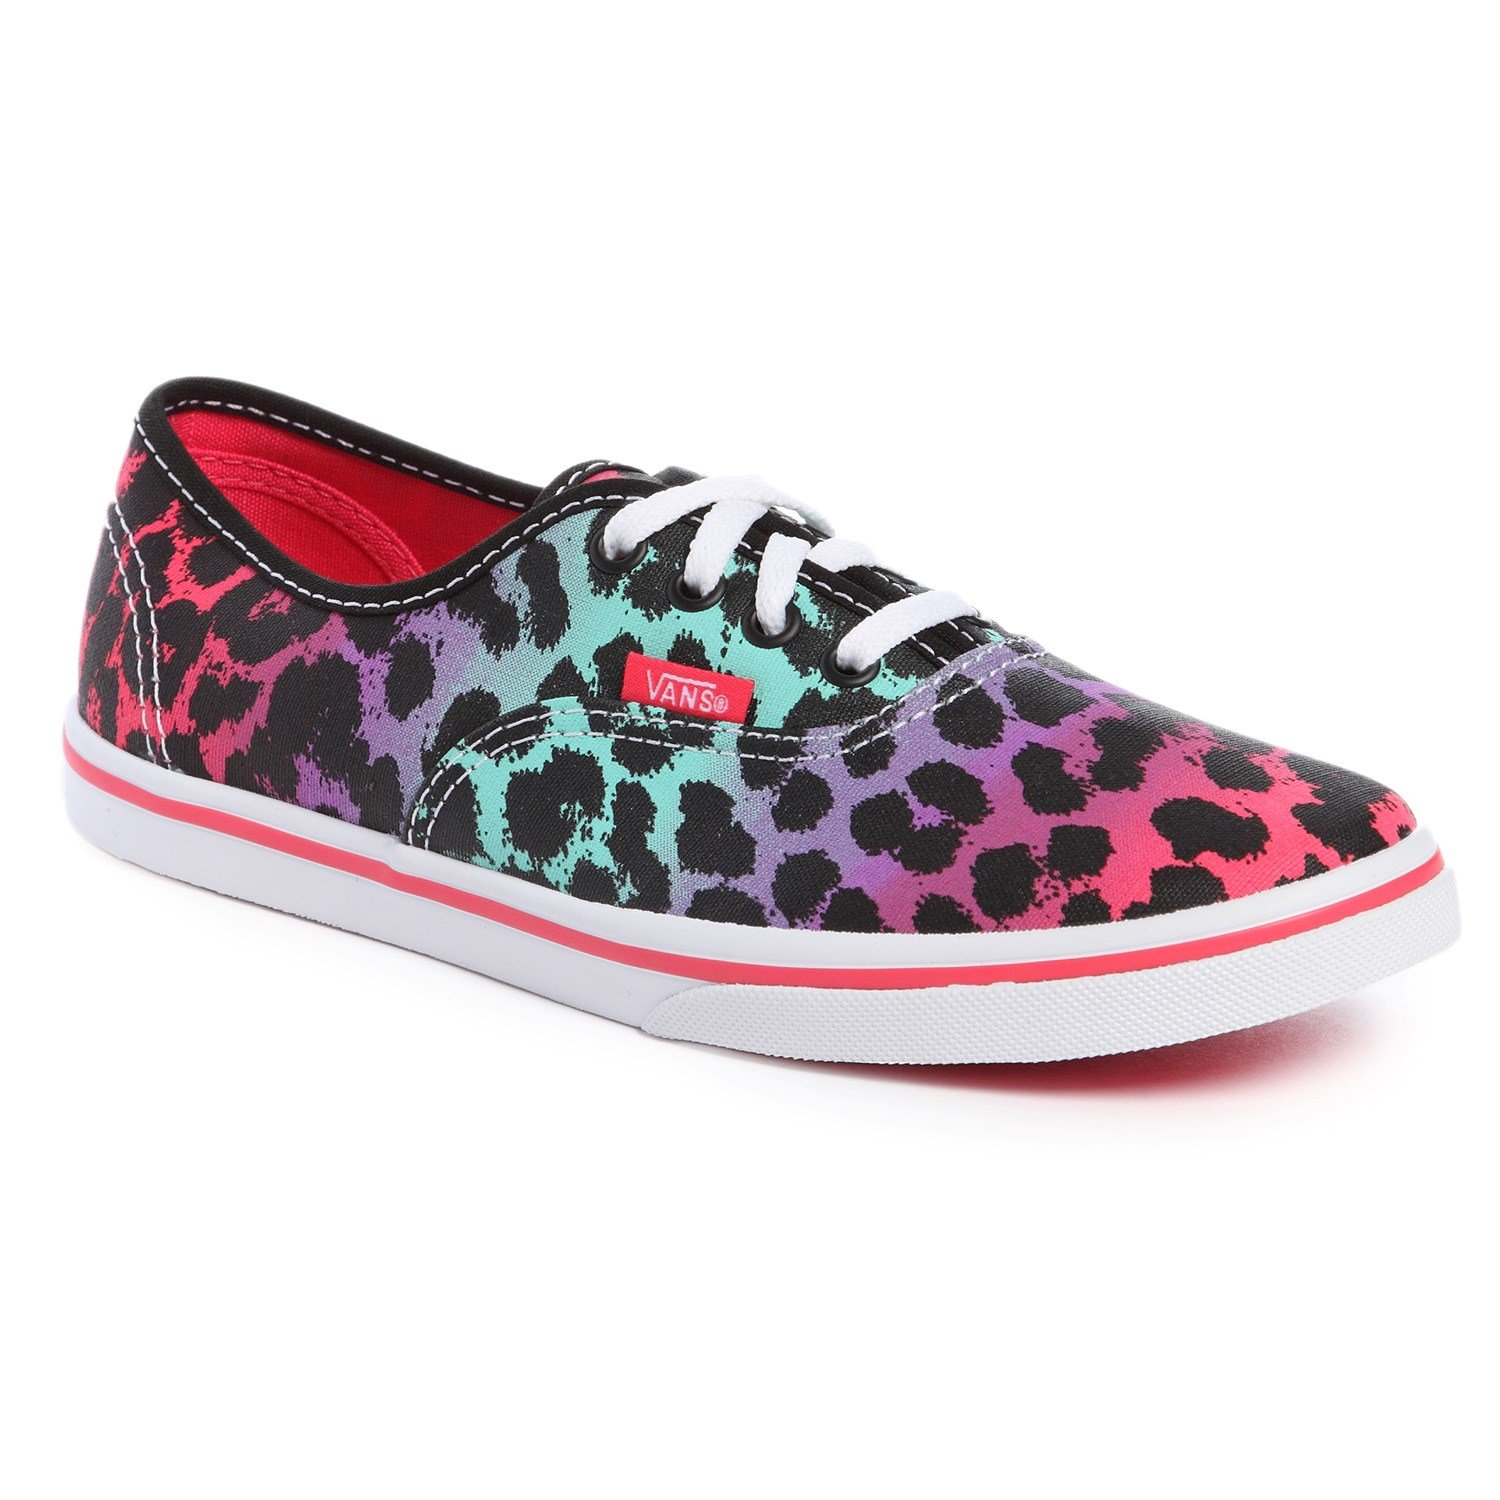 Vans Authentic Lo Pro Shoes - Girl's | evo outlet
 Red Vans Shoes For Girls